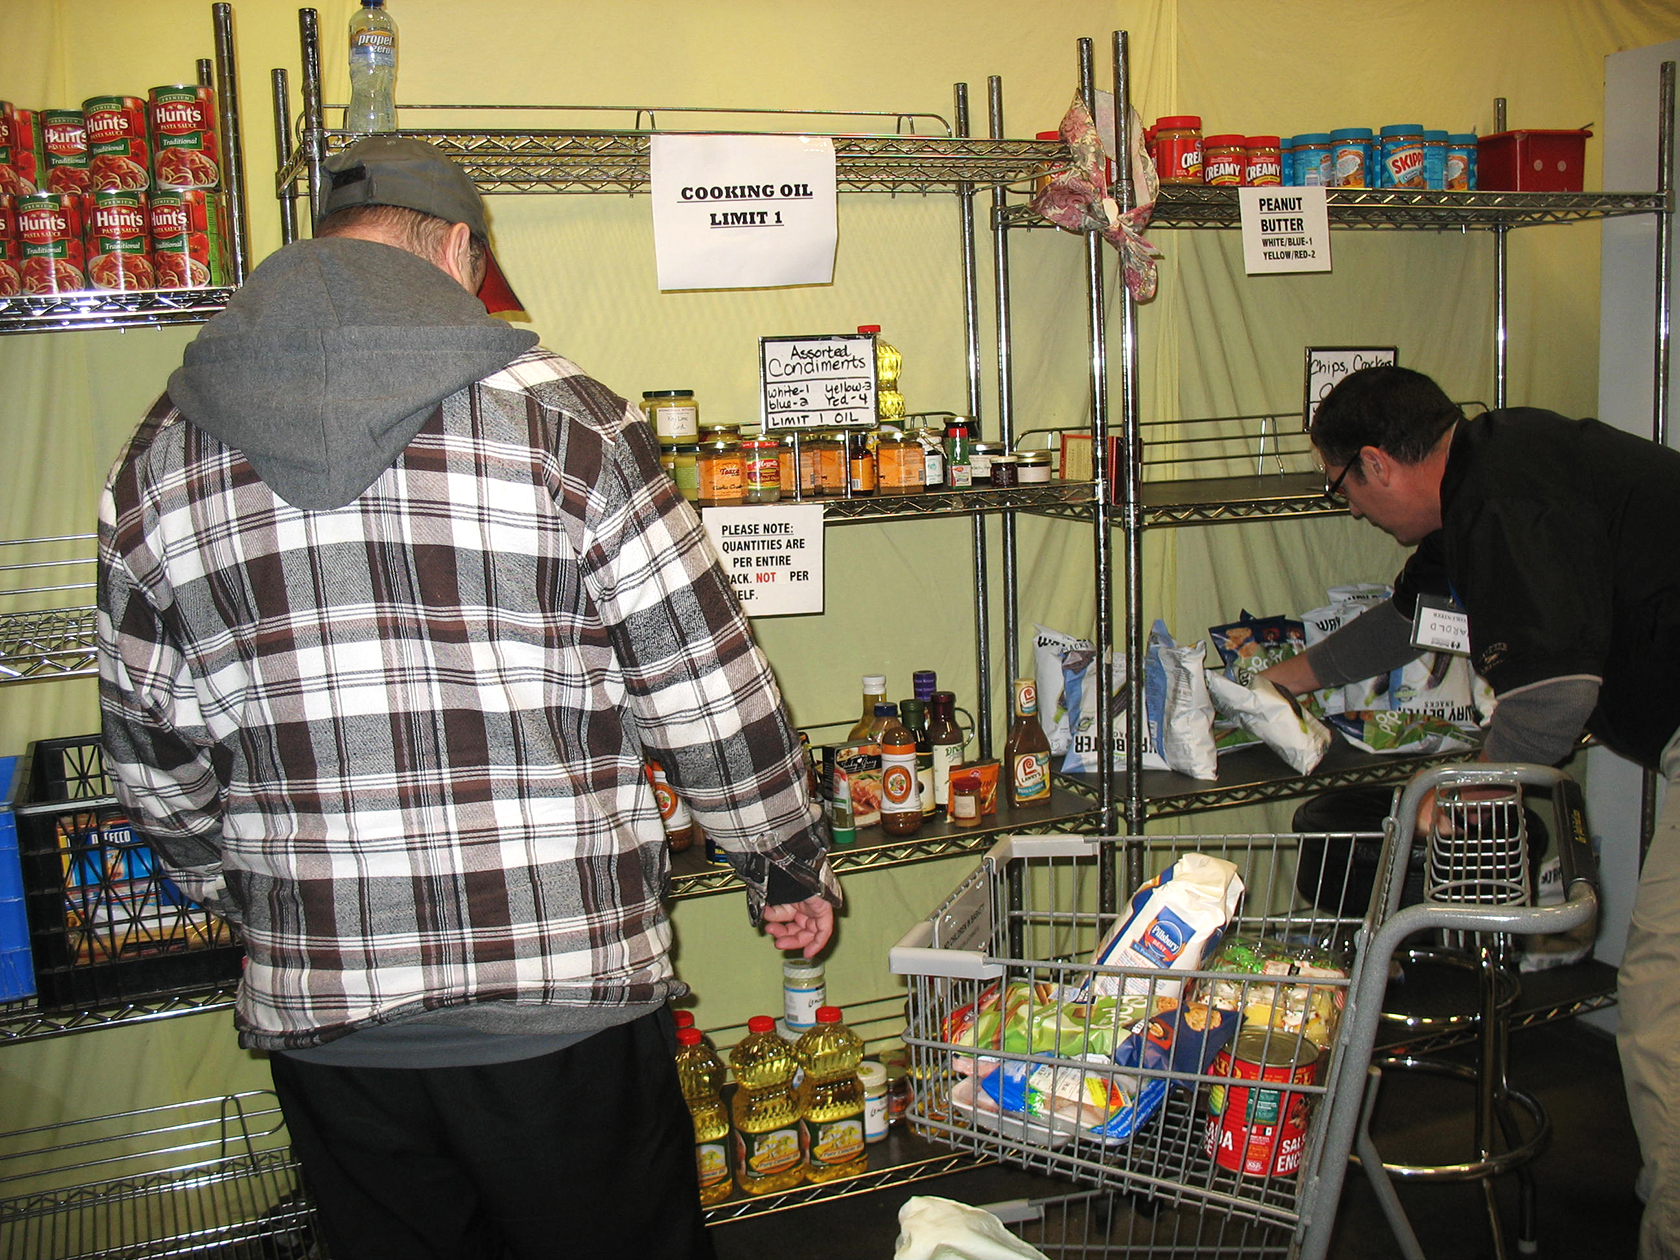 Harvey supplements his income with food stamps, regularly visiting the Ballard Food Bank.